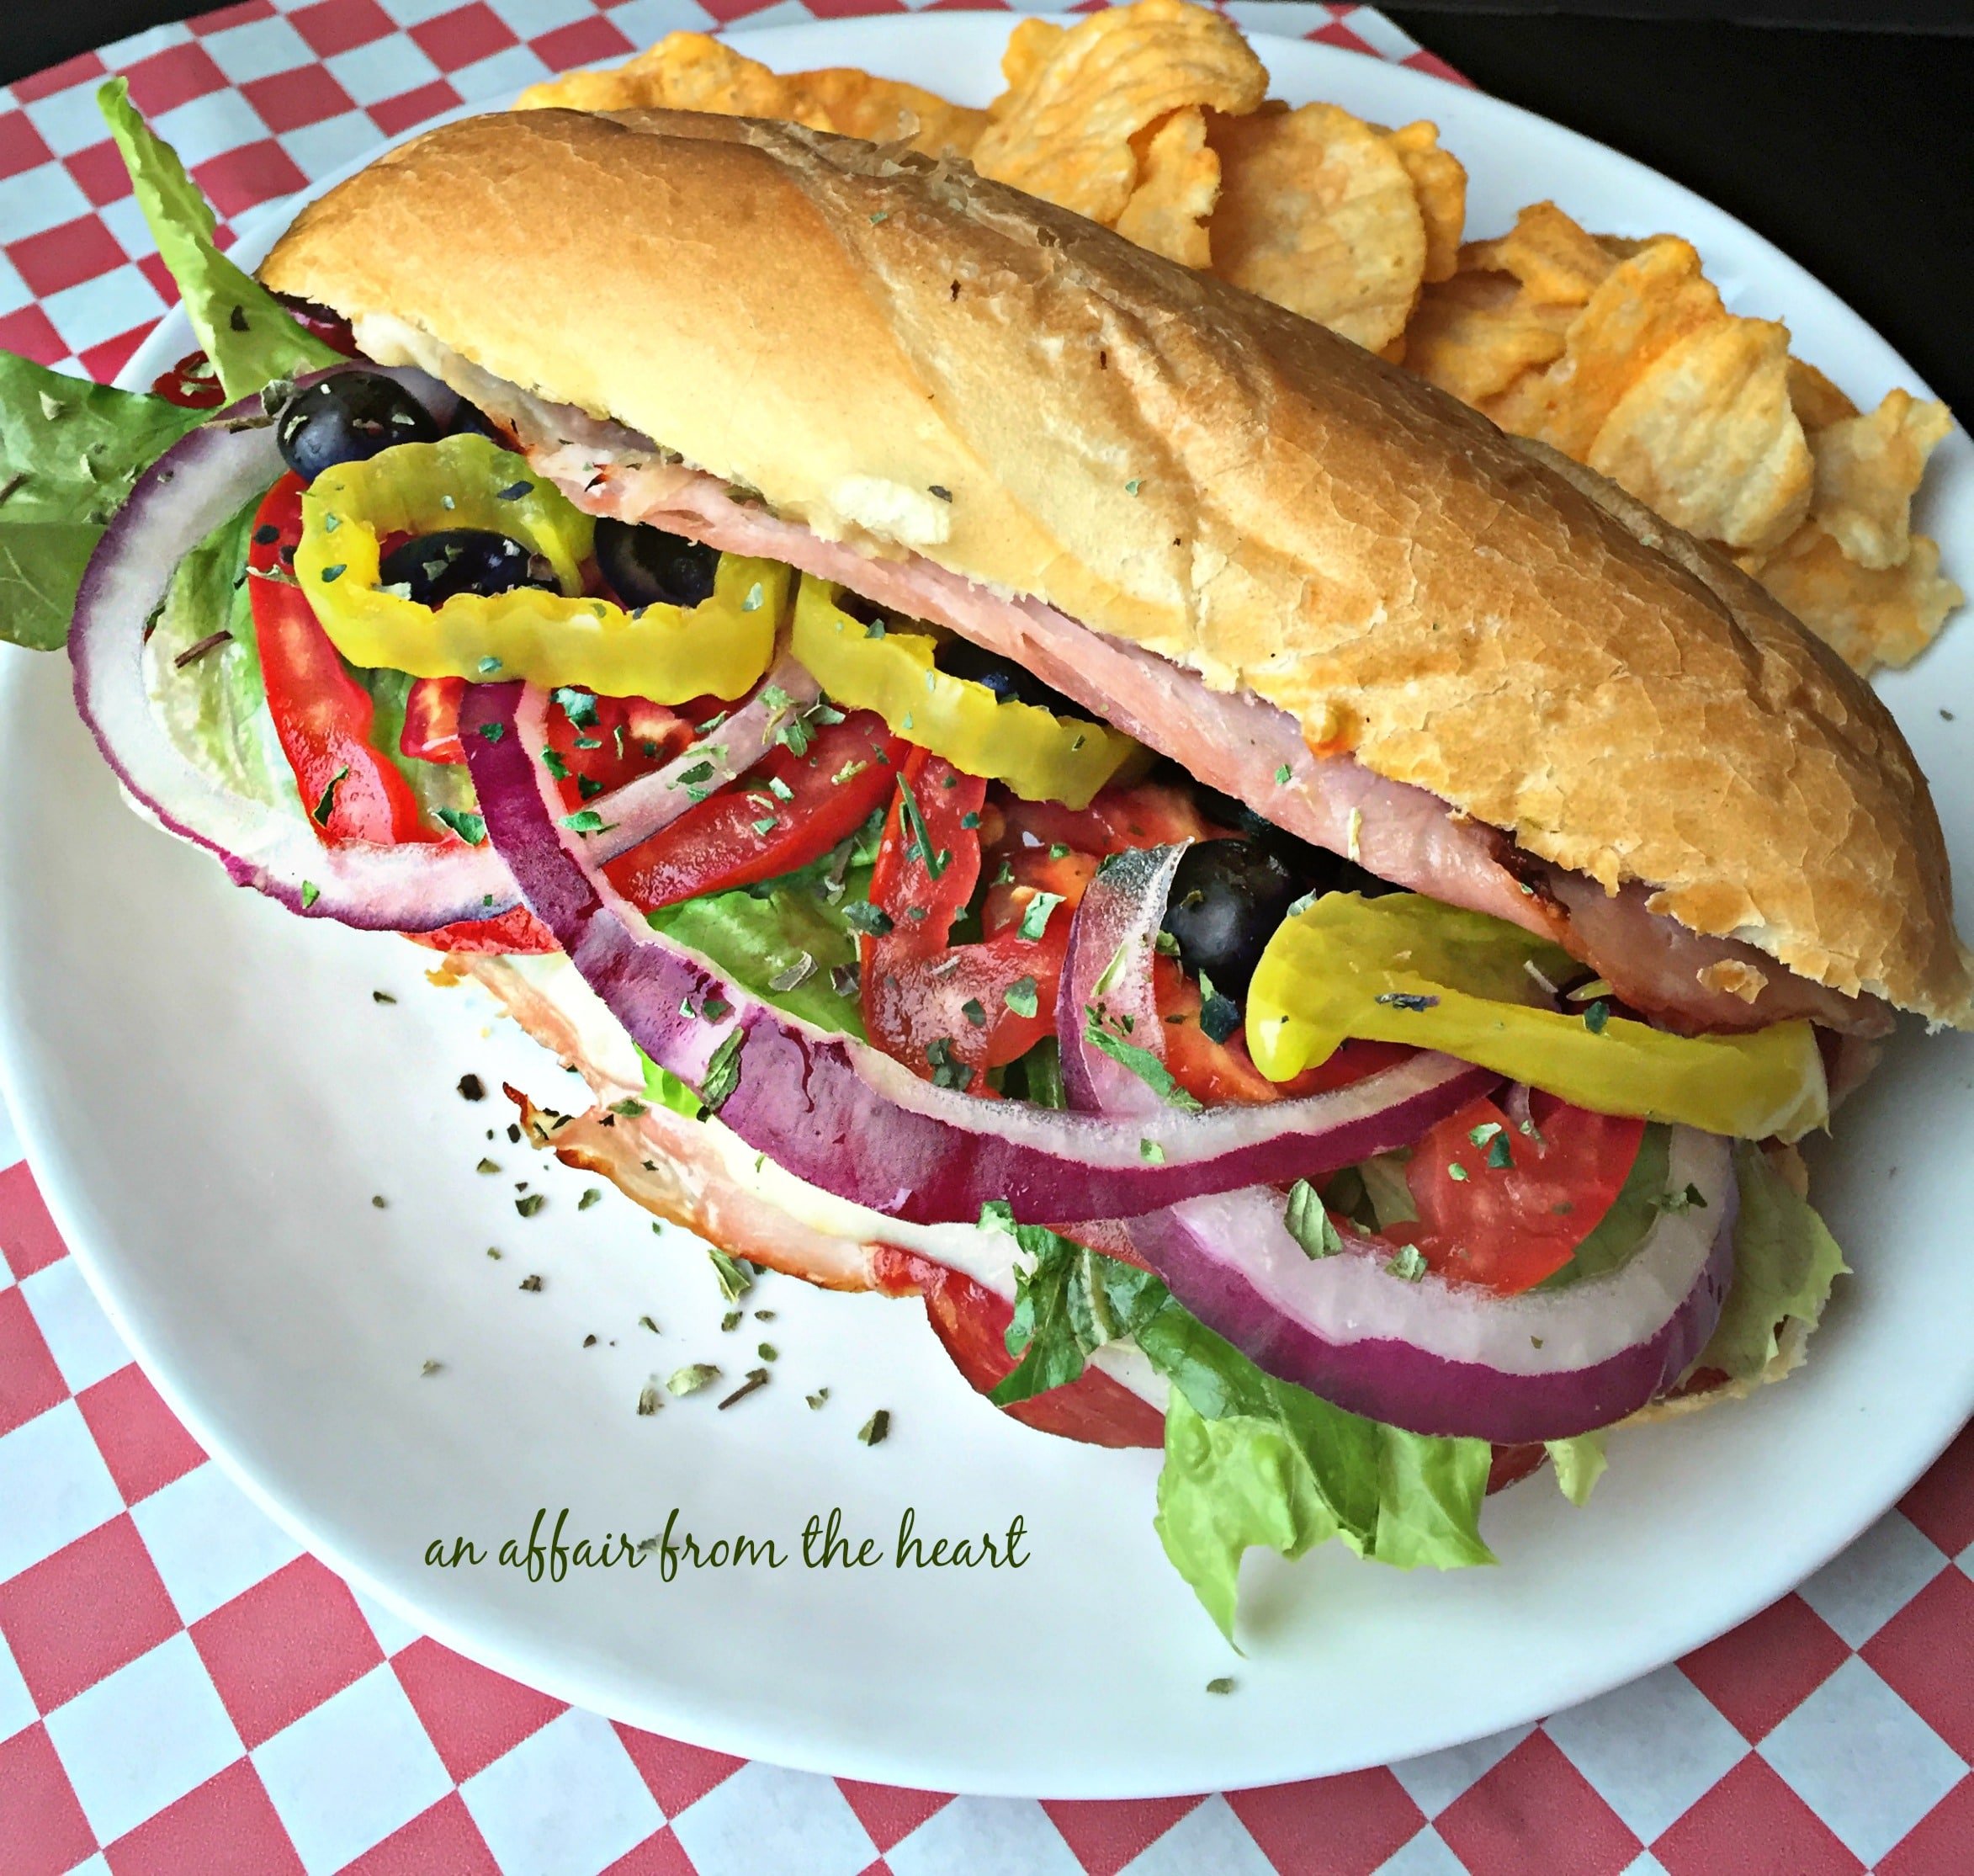 What Finger Foods Work Best With a Sub Sandwich as the Main Food